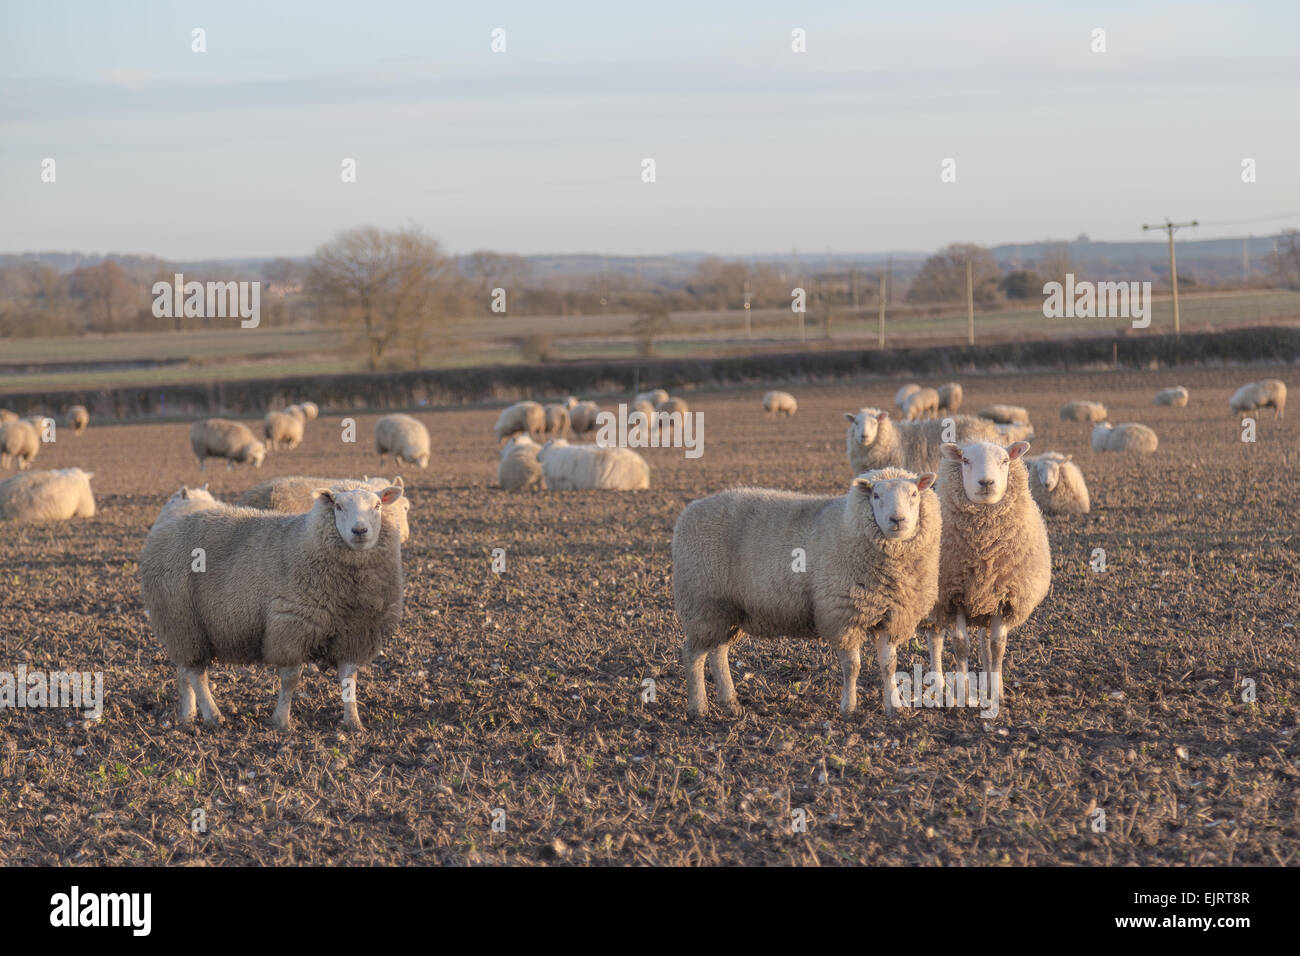 Large amounts of sheep in a field and some of them looking towards the camera Stock Photo